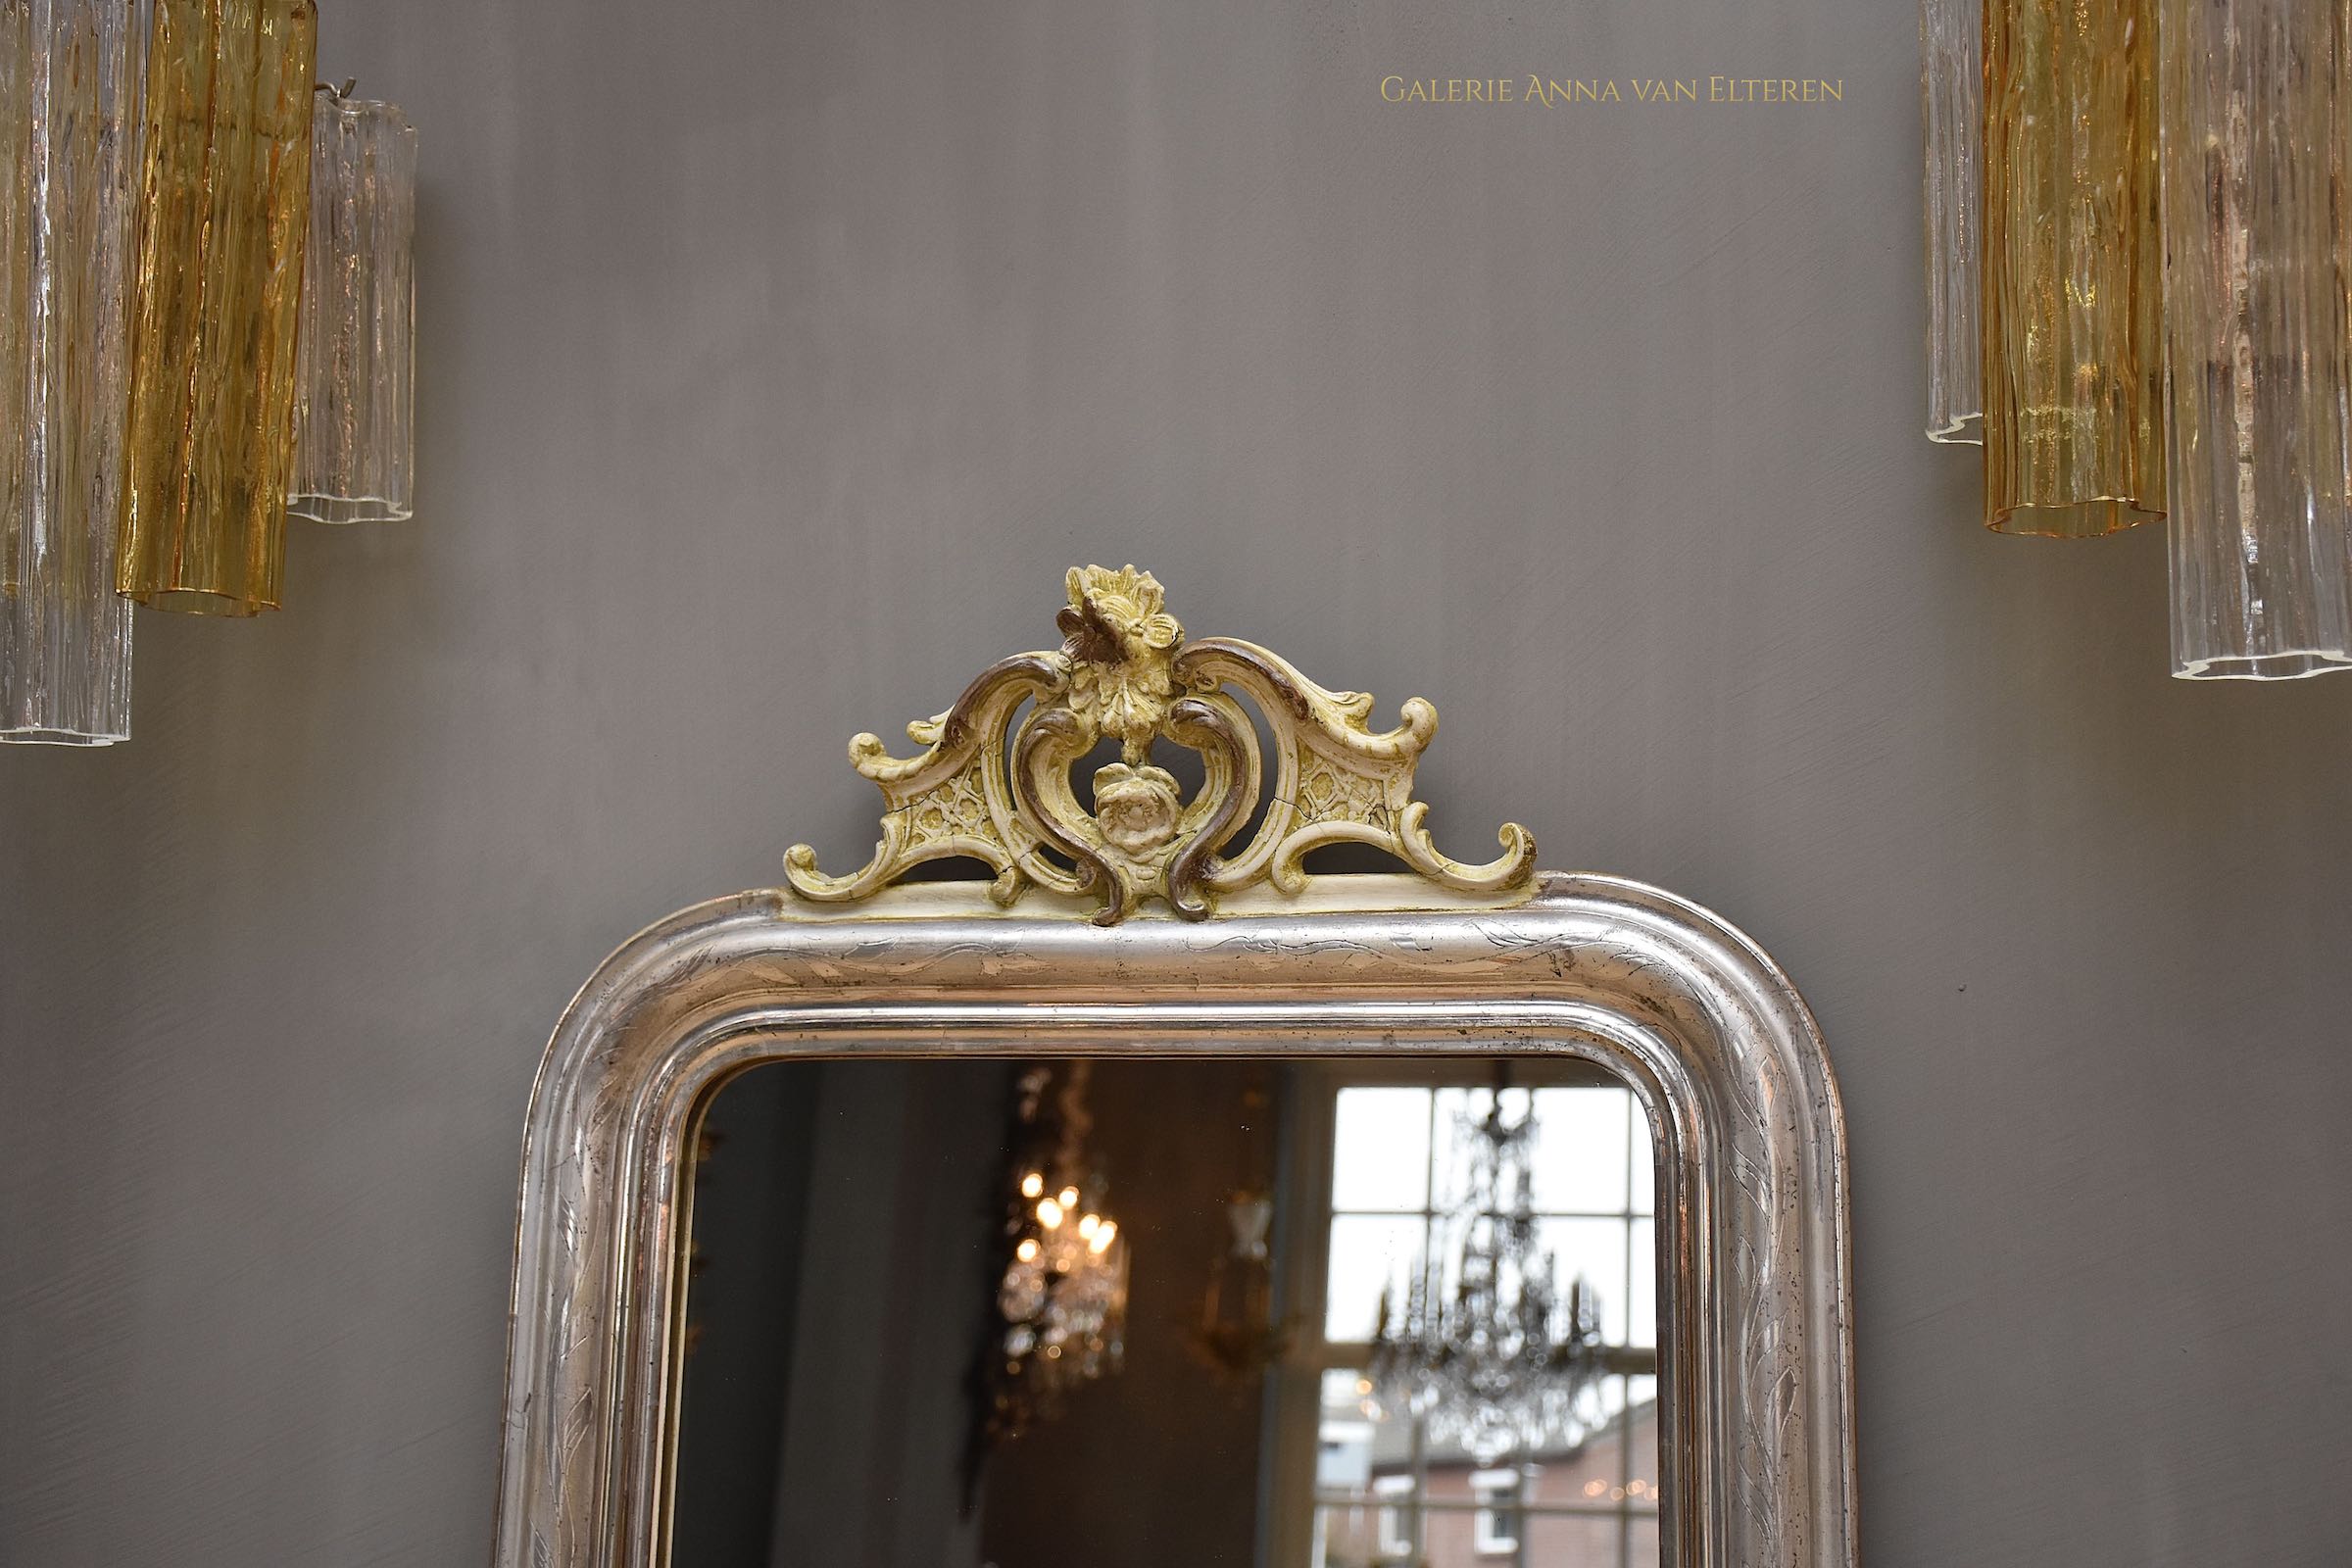 19th c. French mirror with a pretty crest